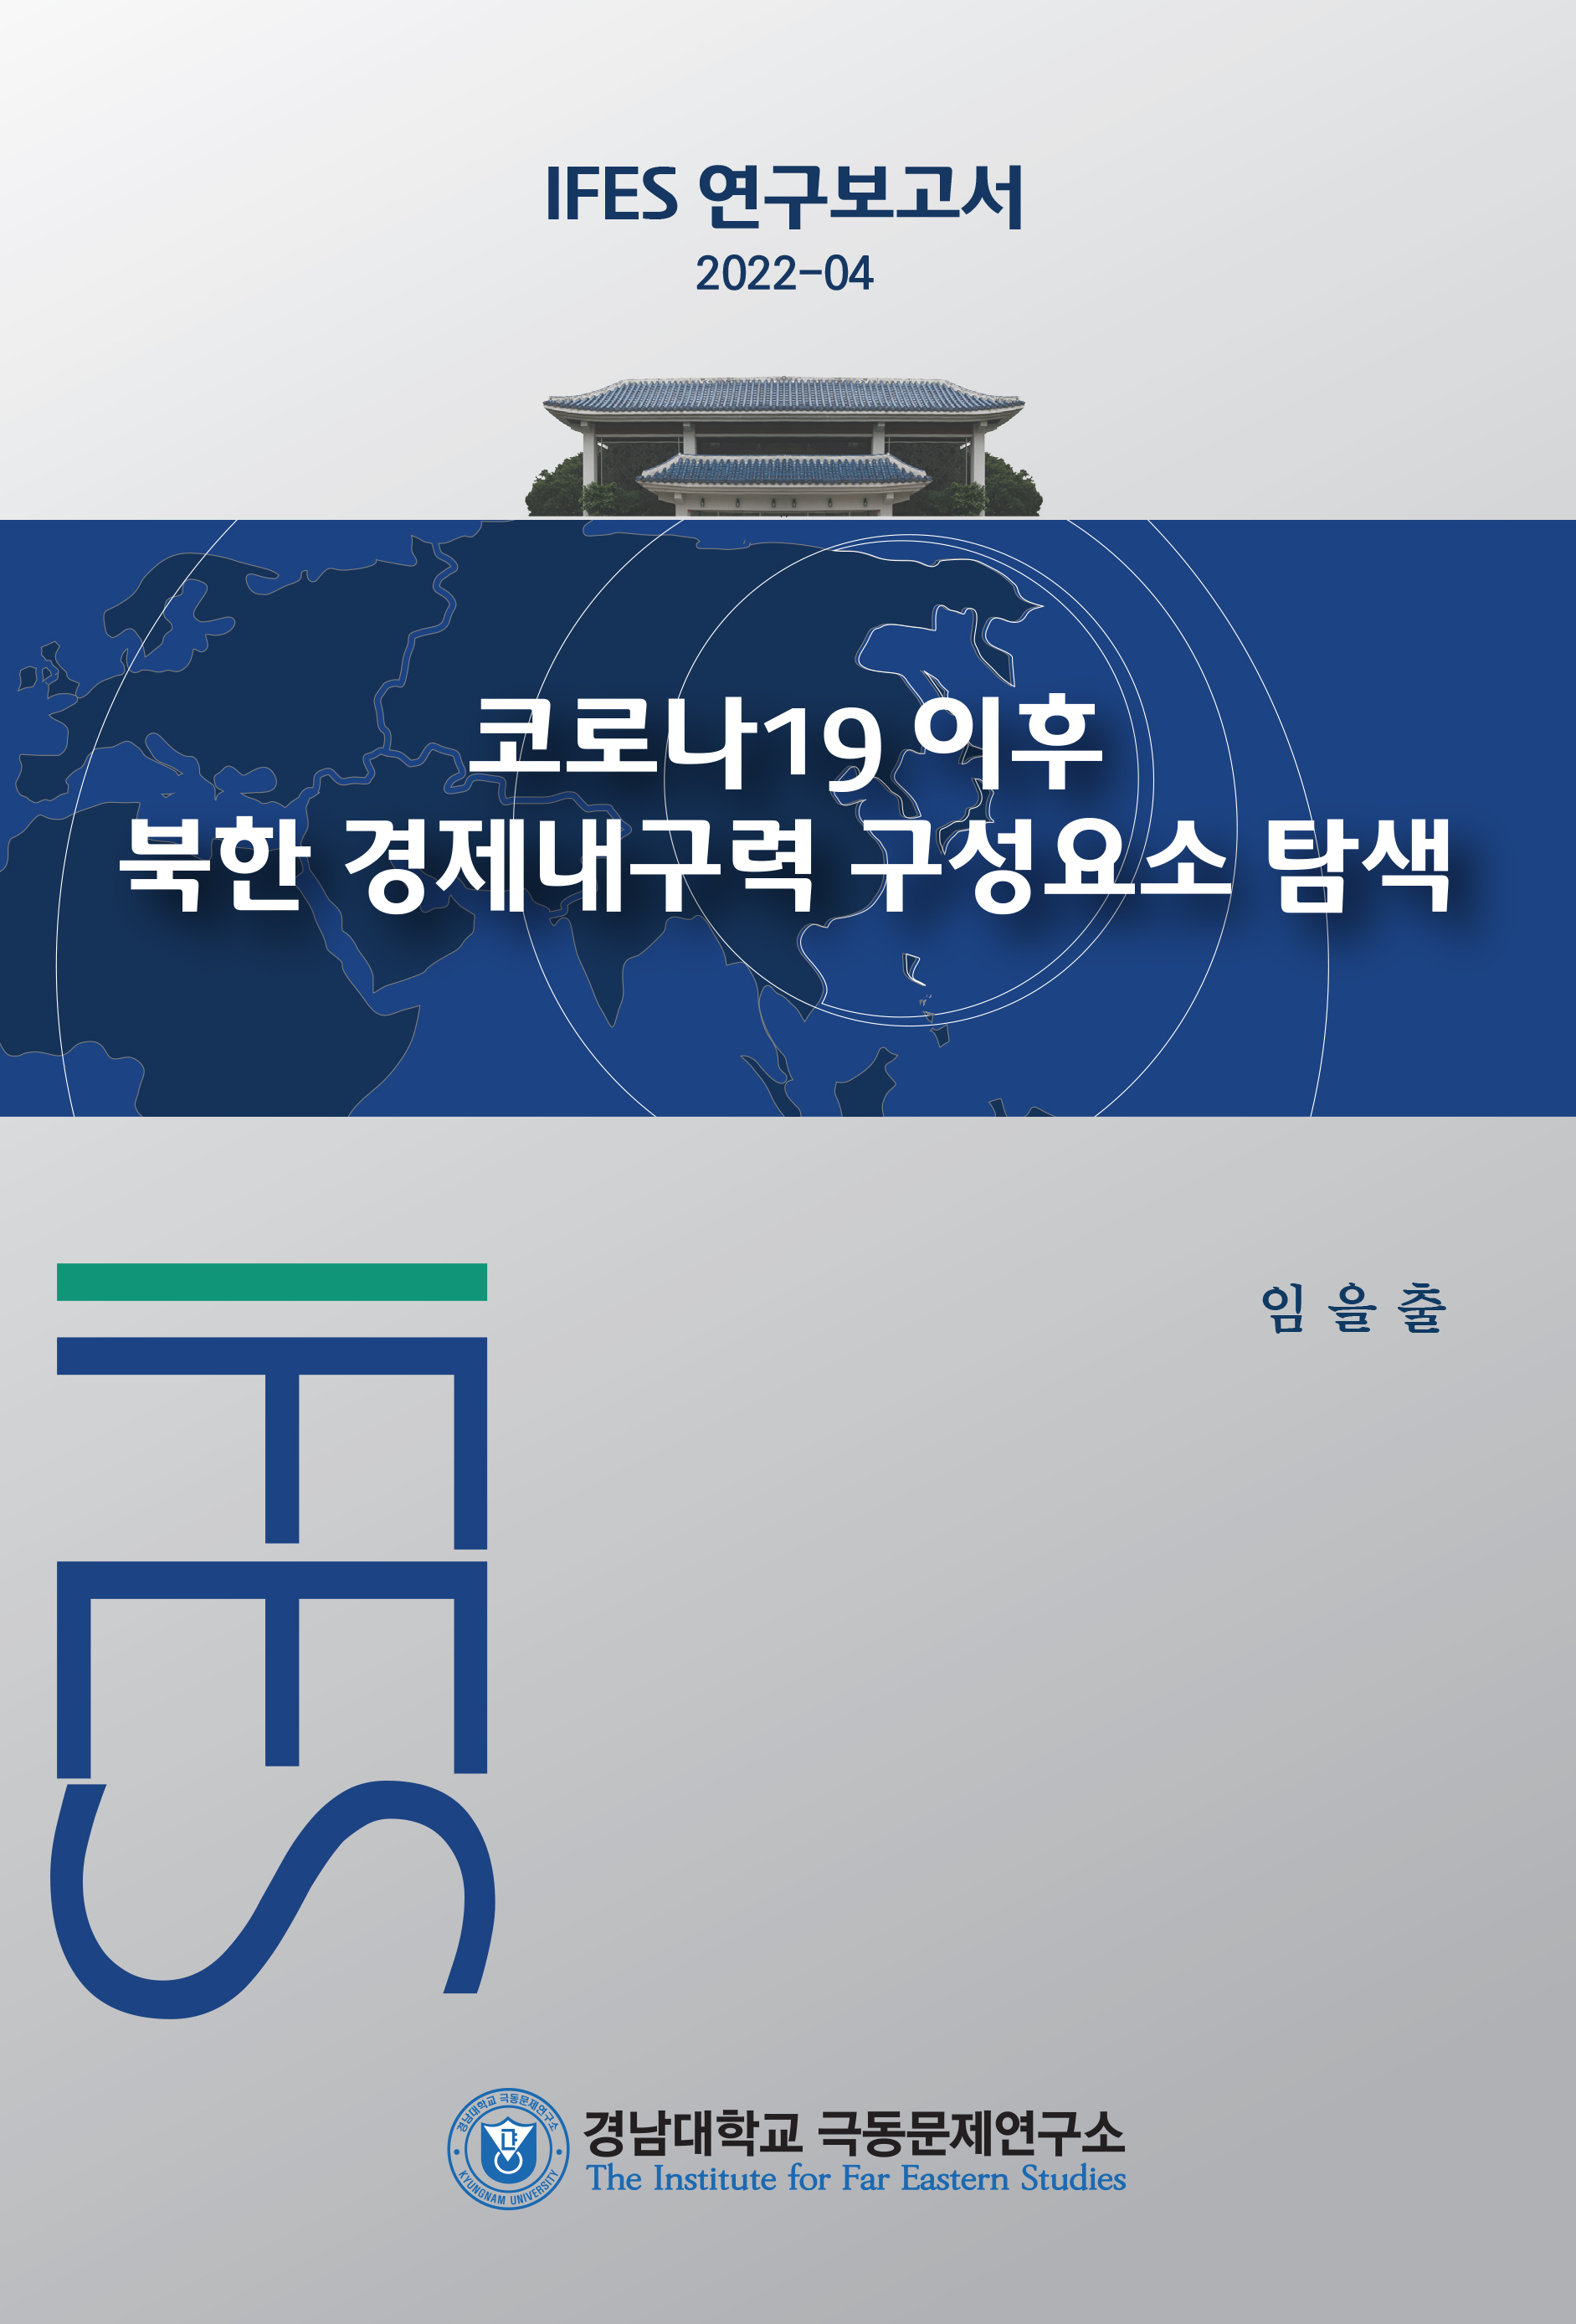 Investigation into components of the strength of the North Korean economy since COVID-19